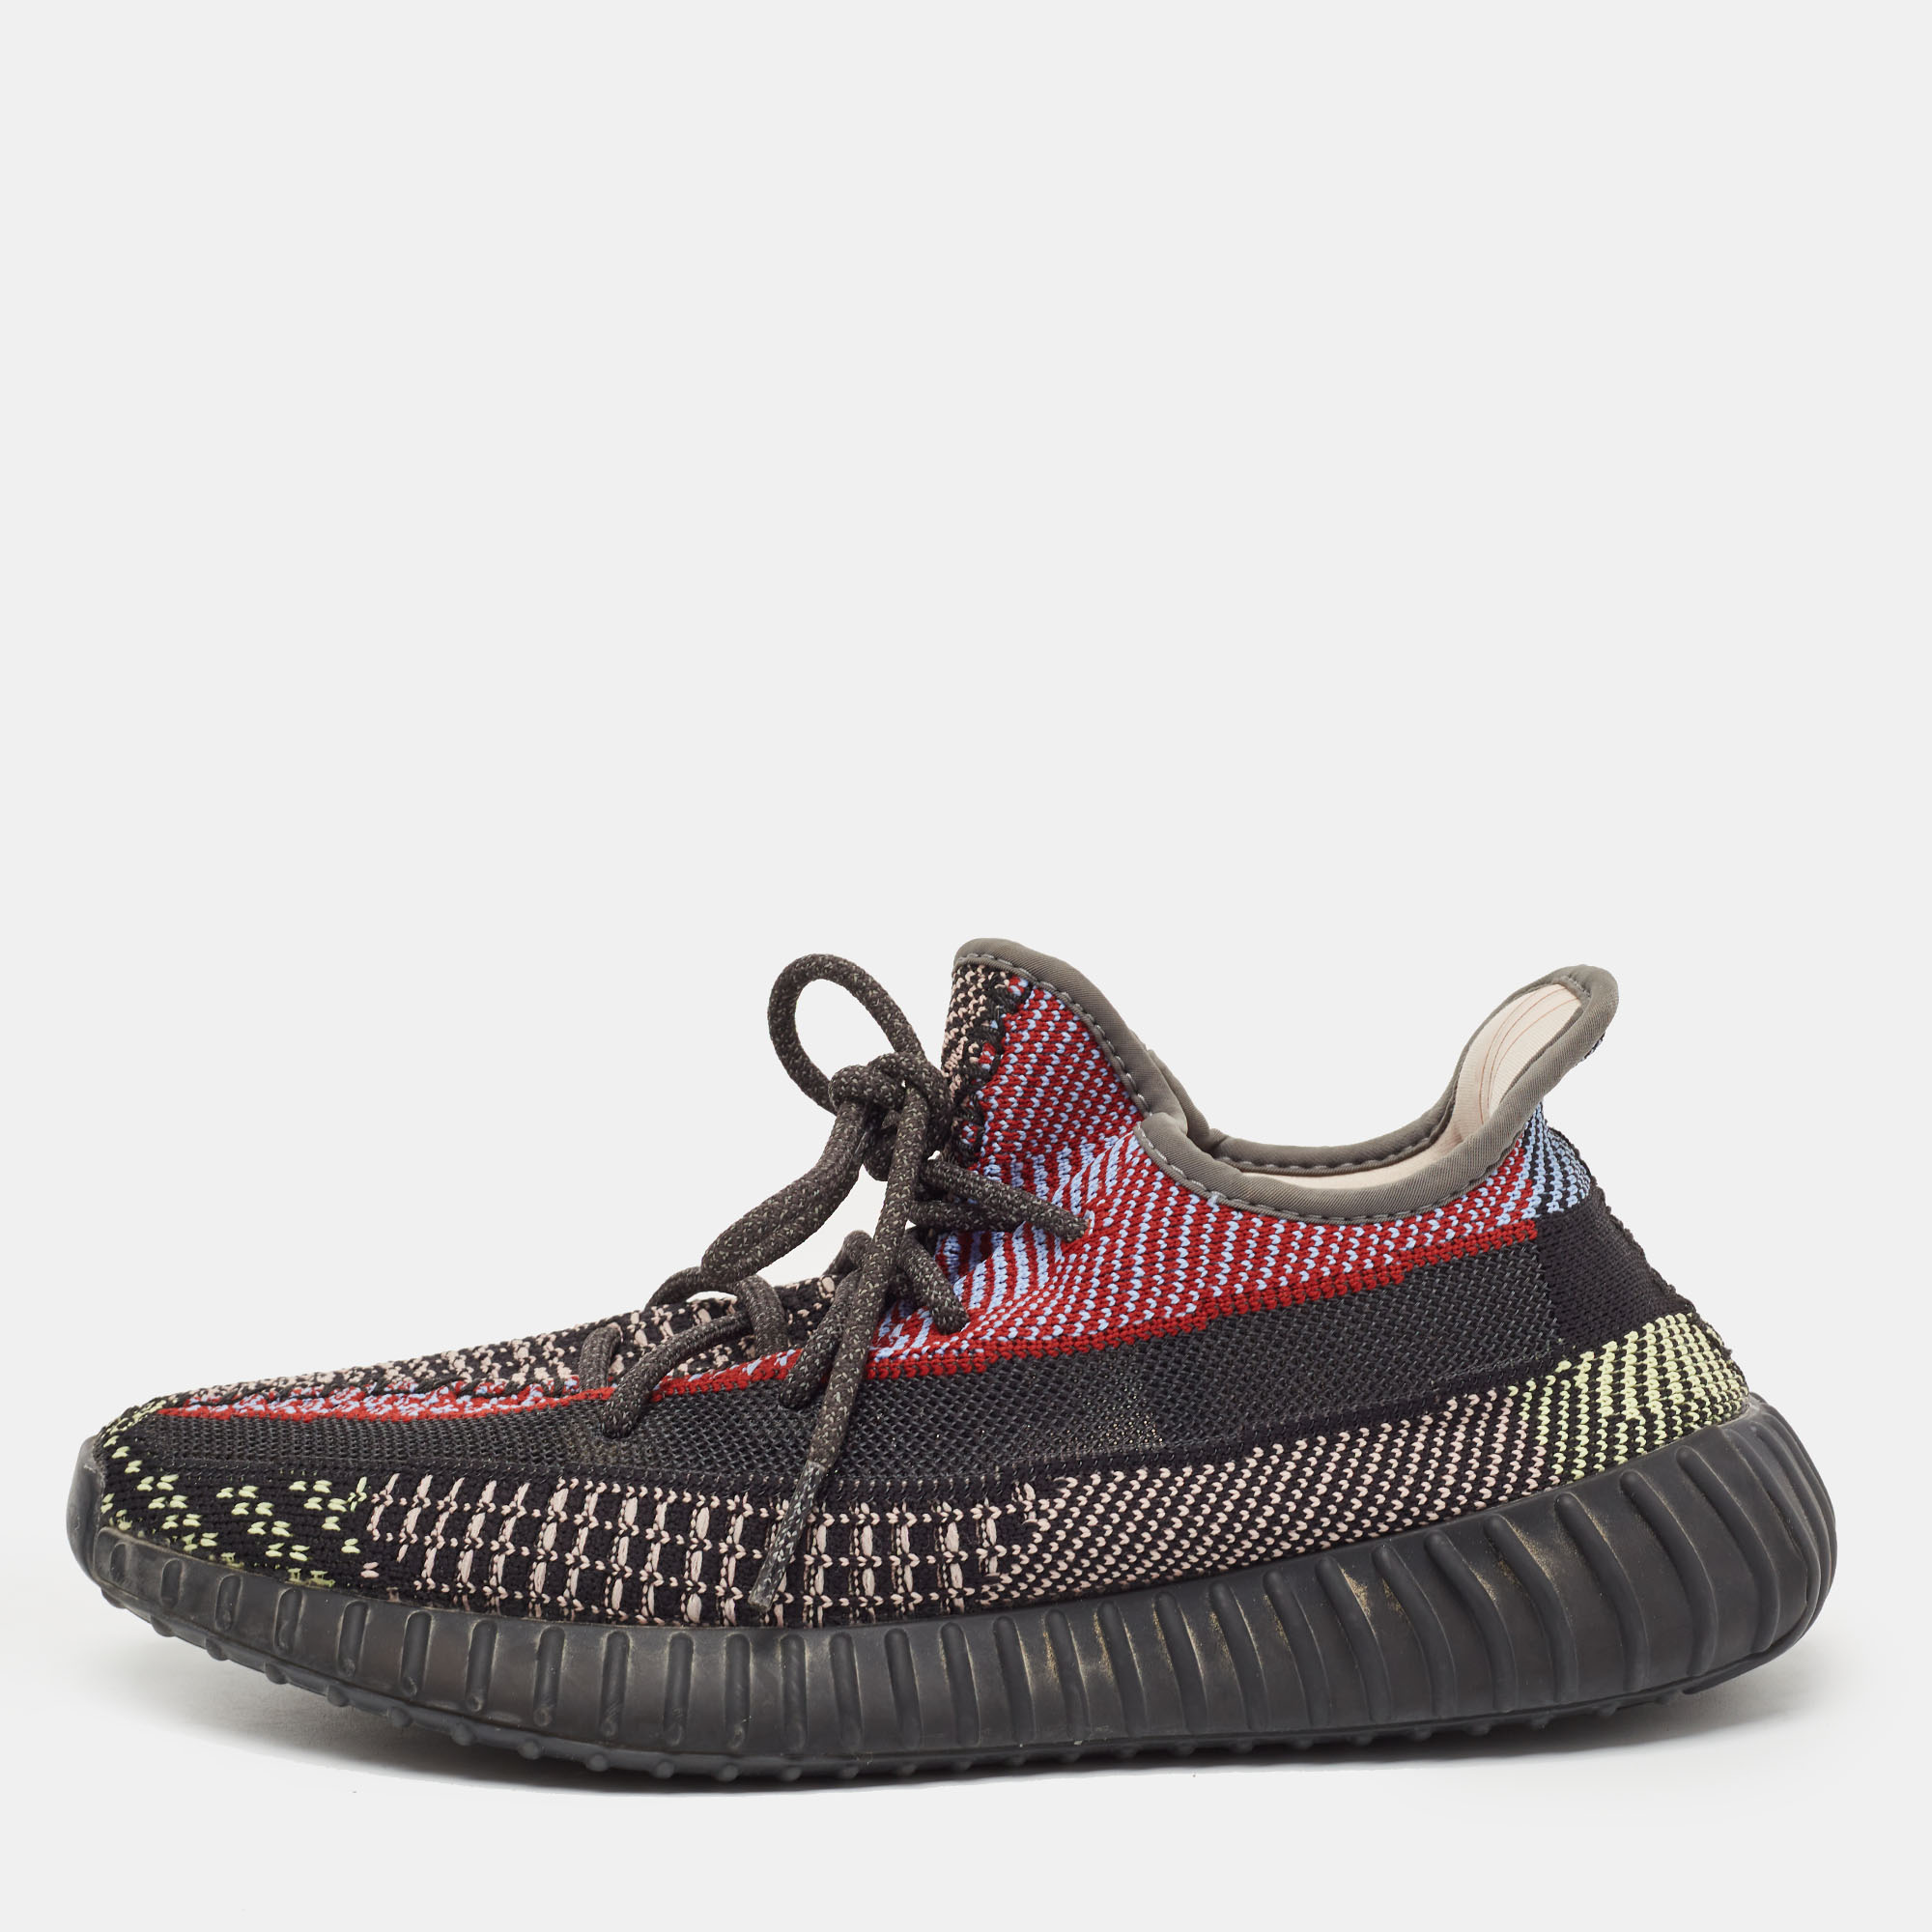 Yeezy X Adidas Multicolor Knit Fabric Boost 350 V2 Yecheil (Non-Reflective) Sneakers Size 43 1/3